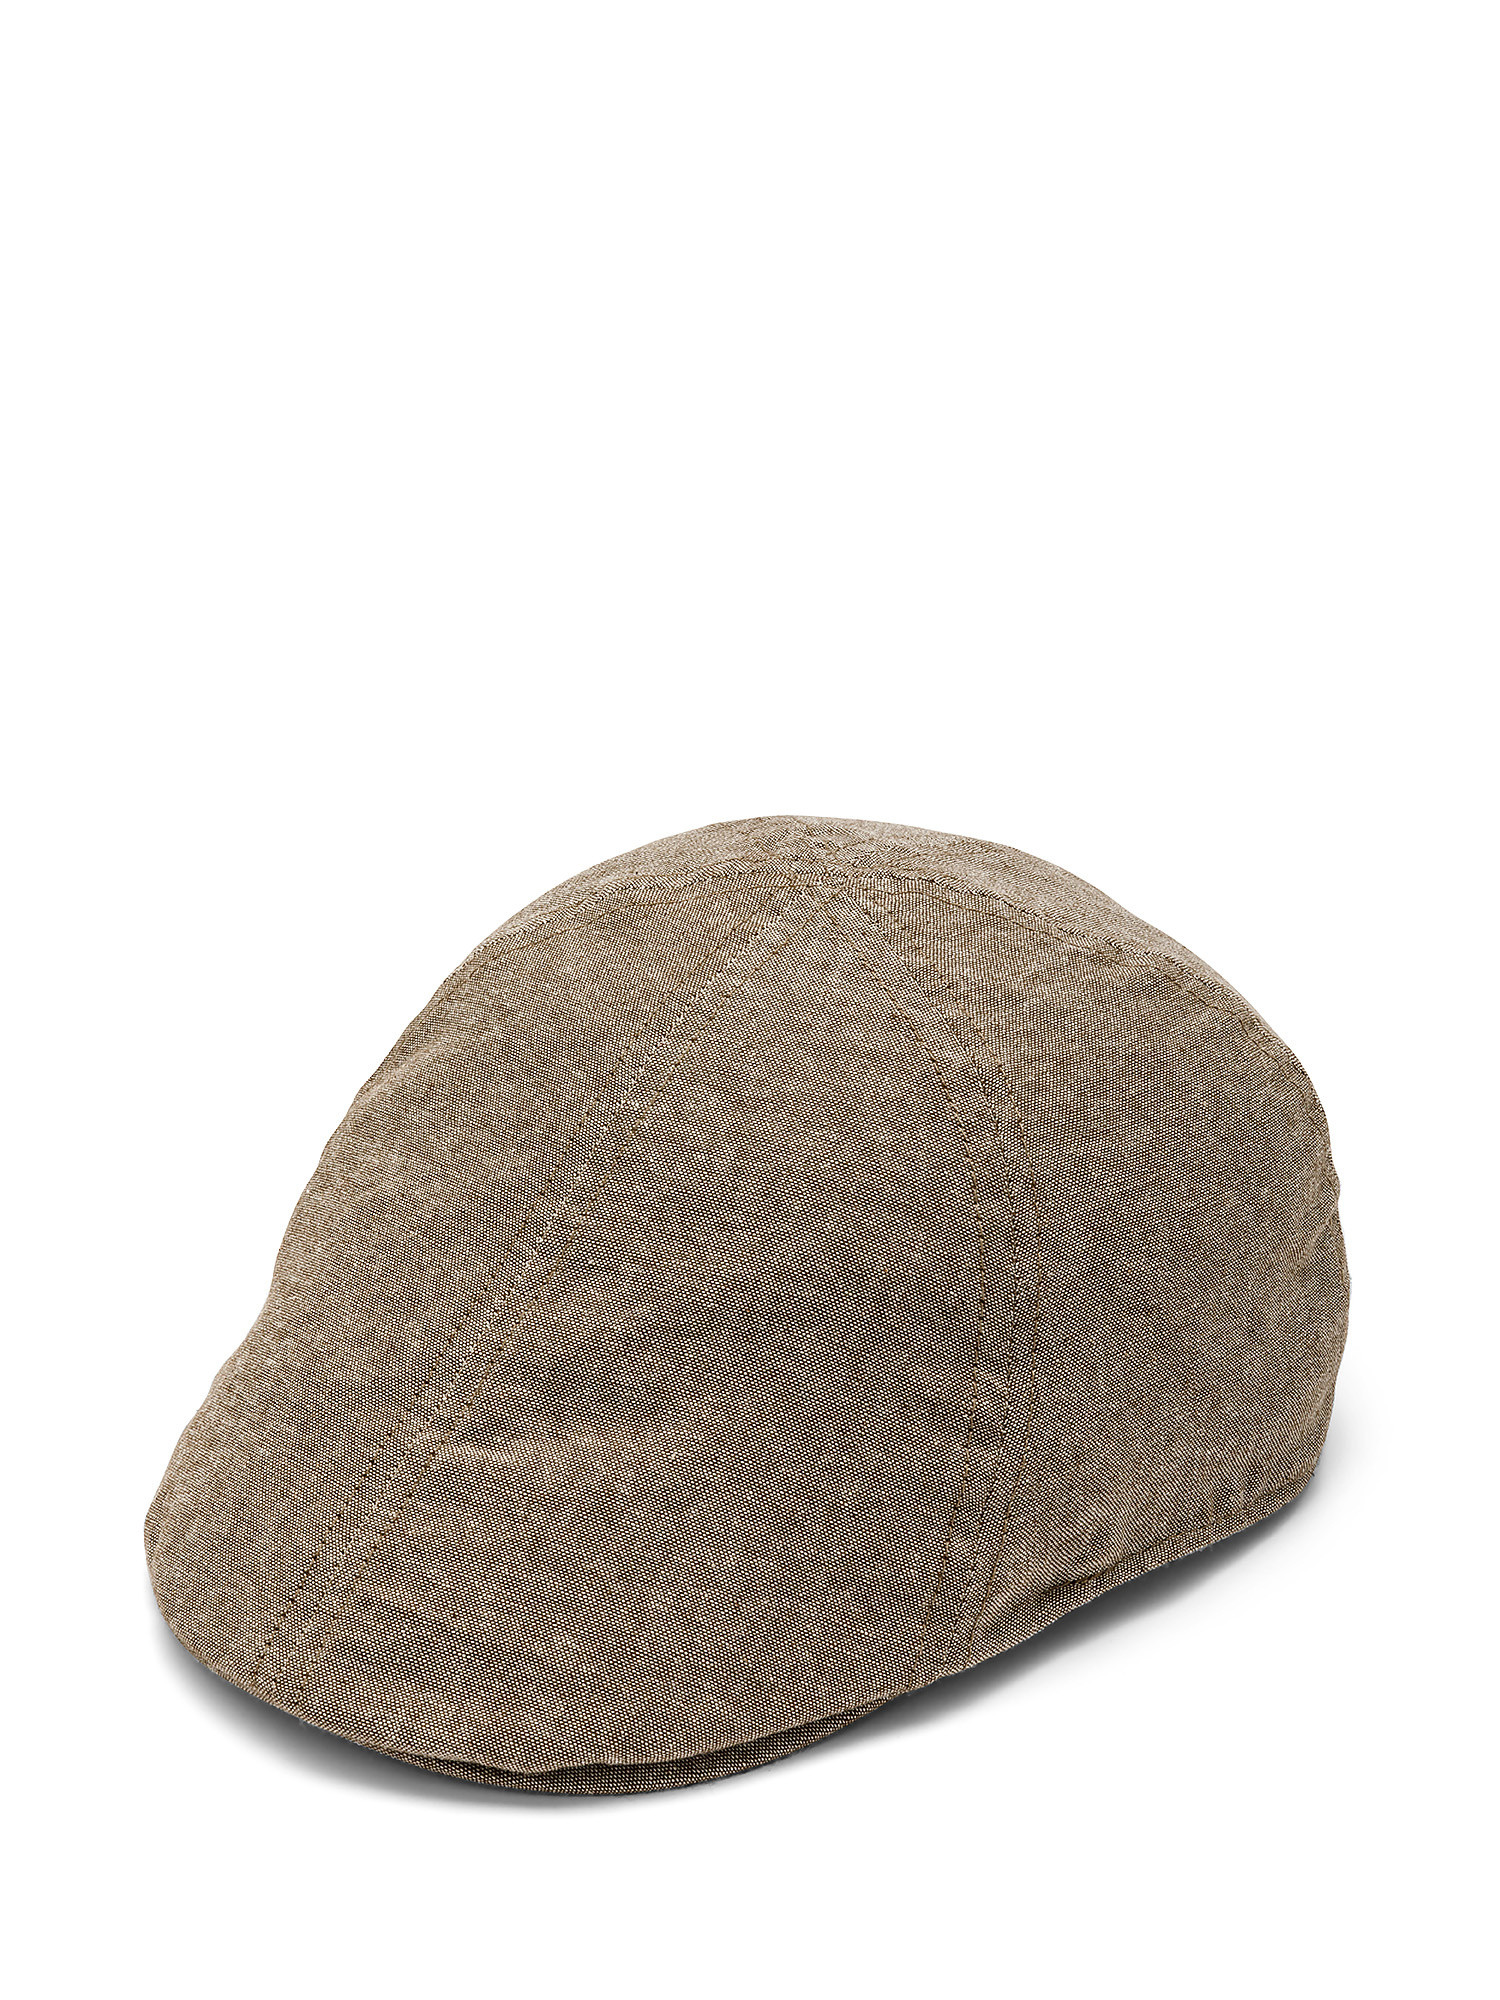 Monochrome cap, Taupe Grey, large image number 0